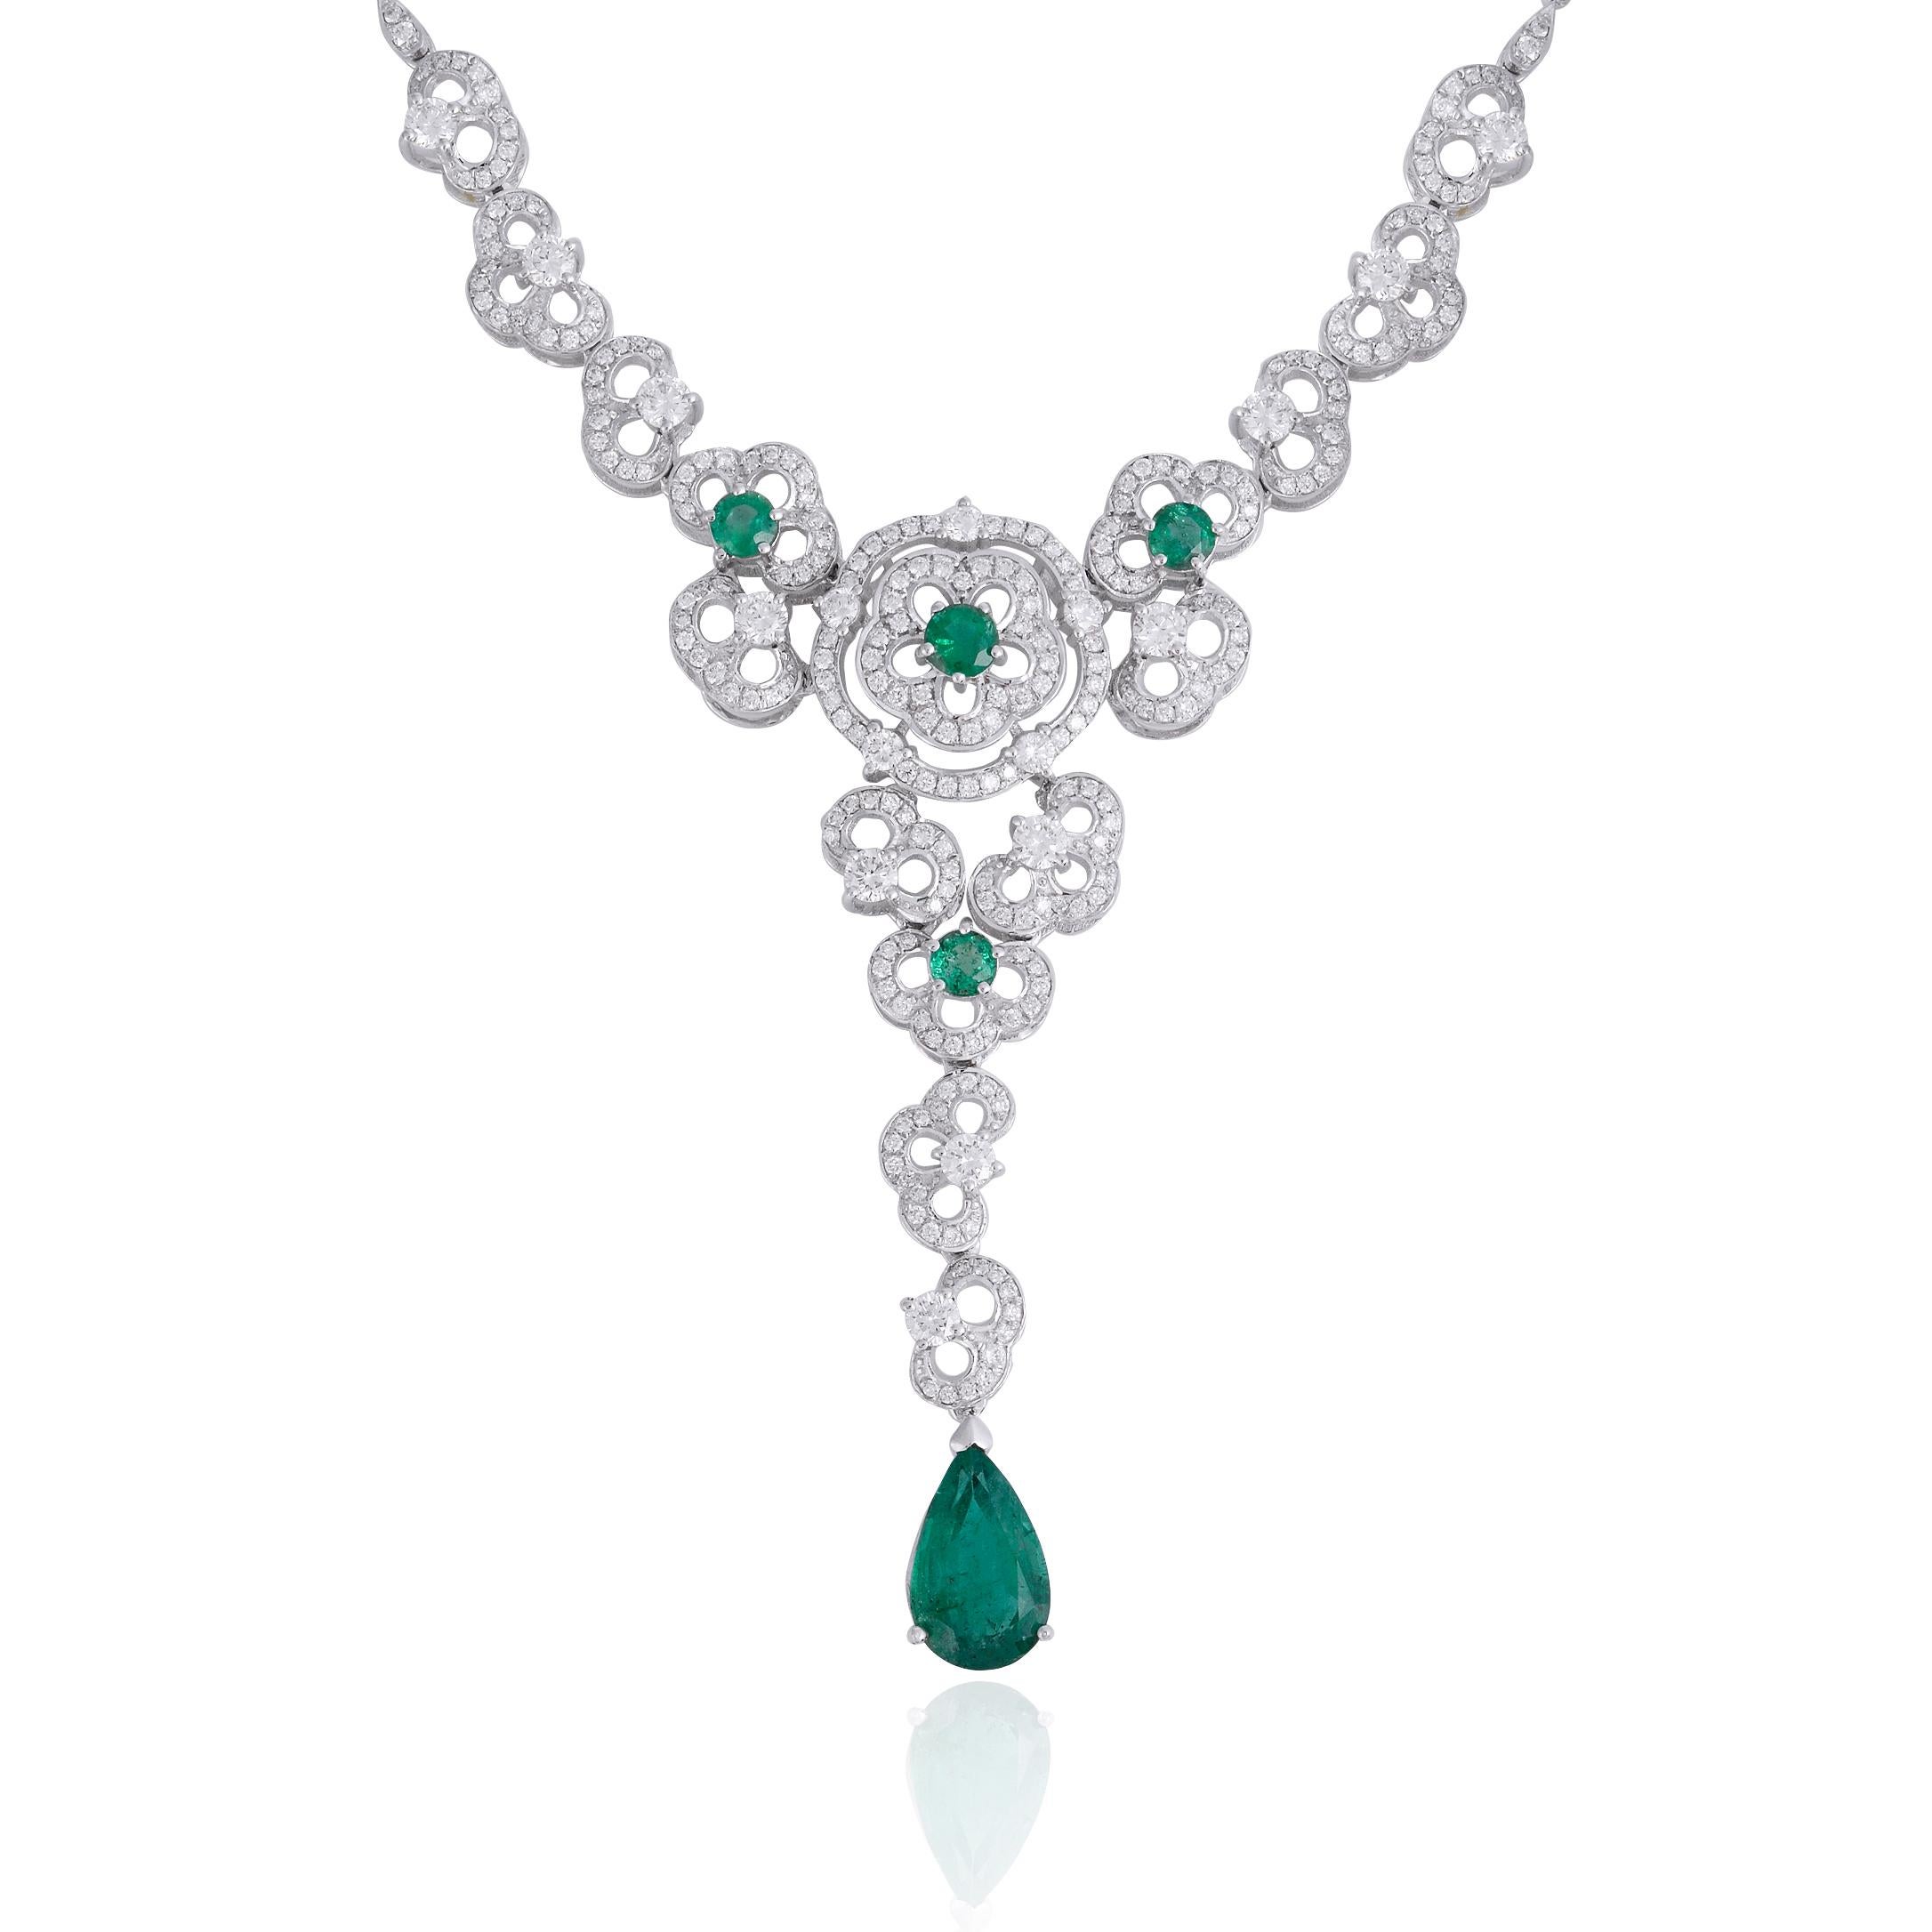 Introducing our zambian emerald gemstone flower pendant diamond necklace. The centerpiece of this necklace is a stunning flower-shaped pendant.This necklace is a true luxury, making it a perfect accessory for both formal occasions and everyday